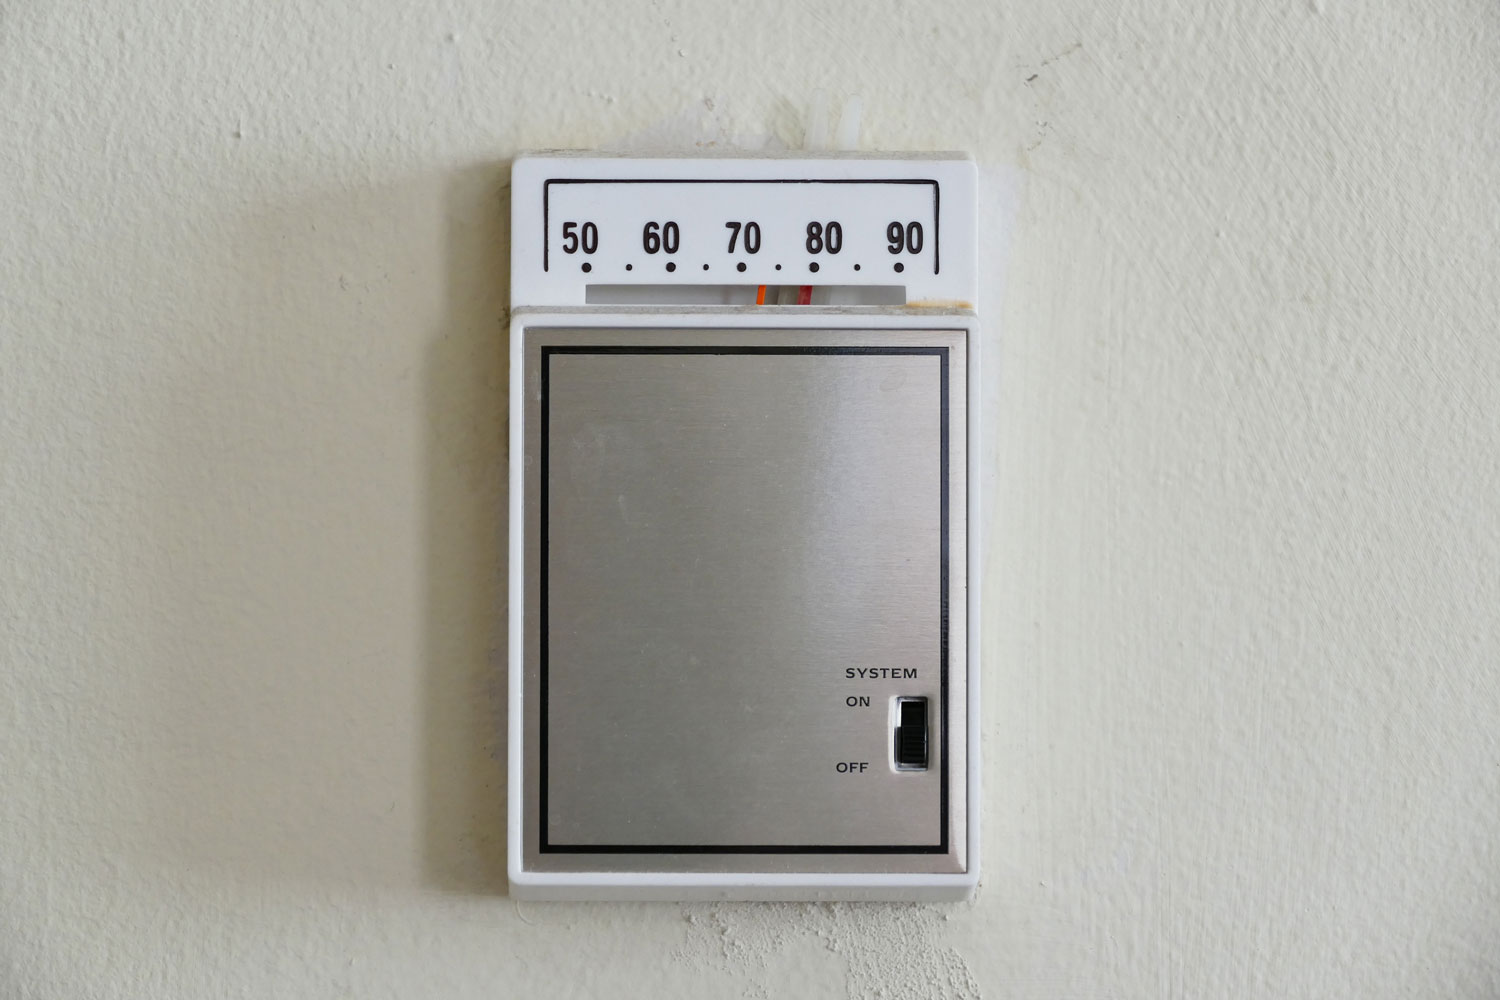 A thermostat control box placed on the wall